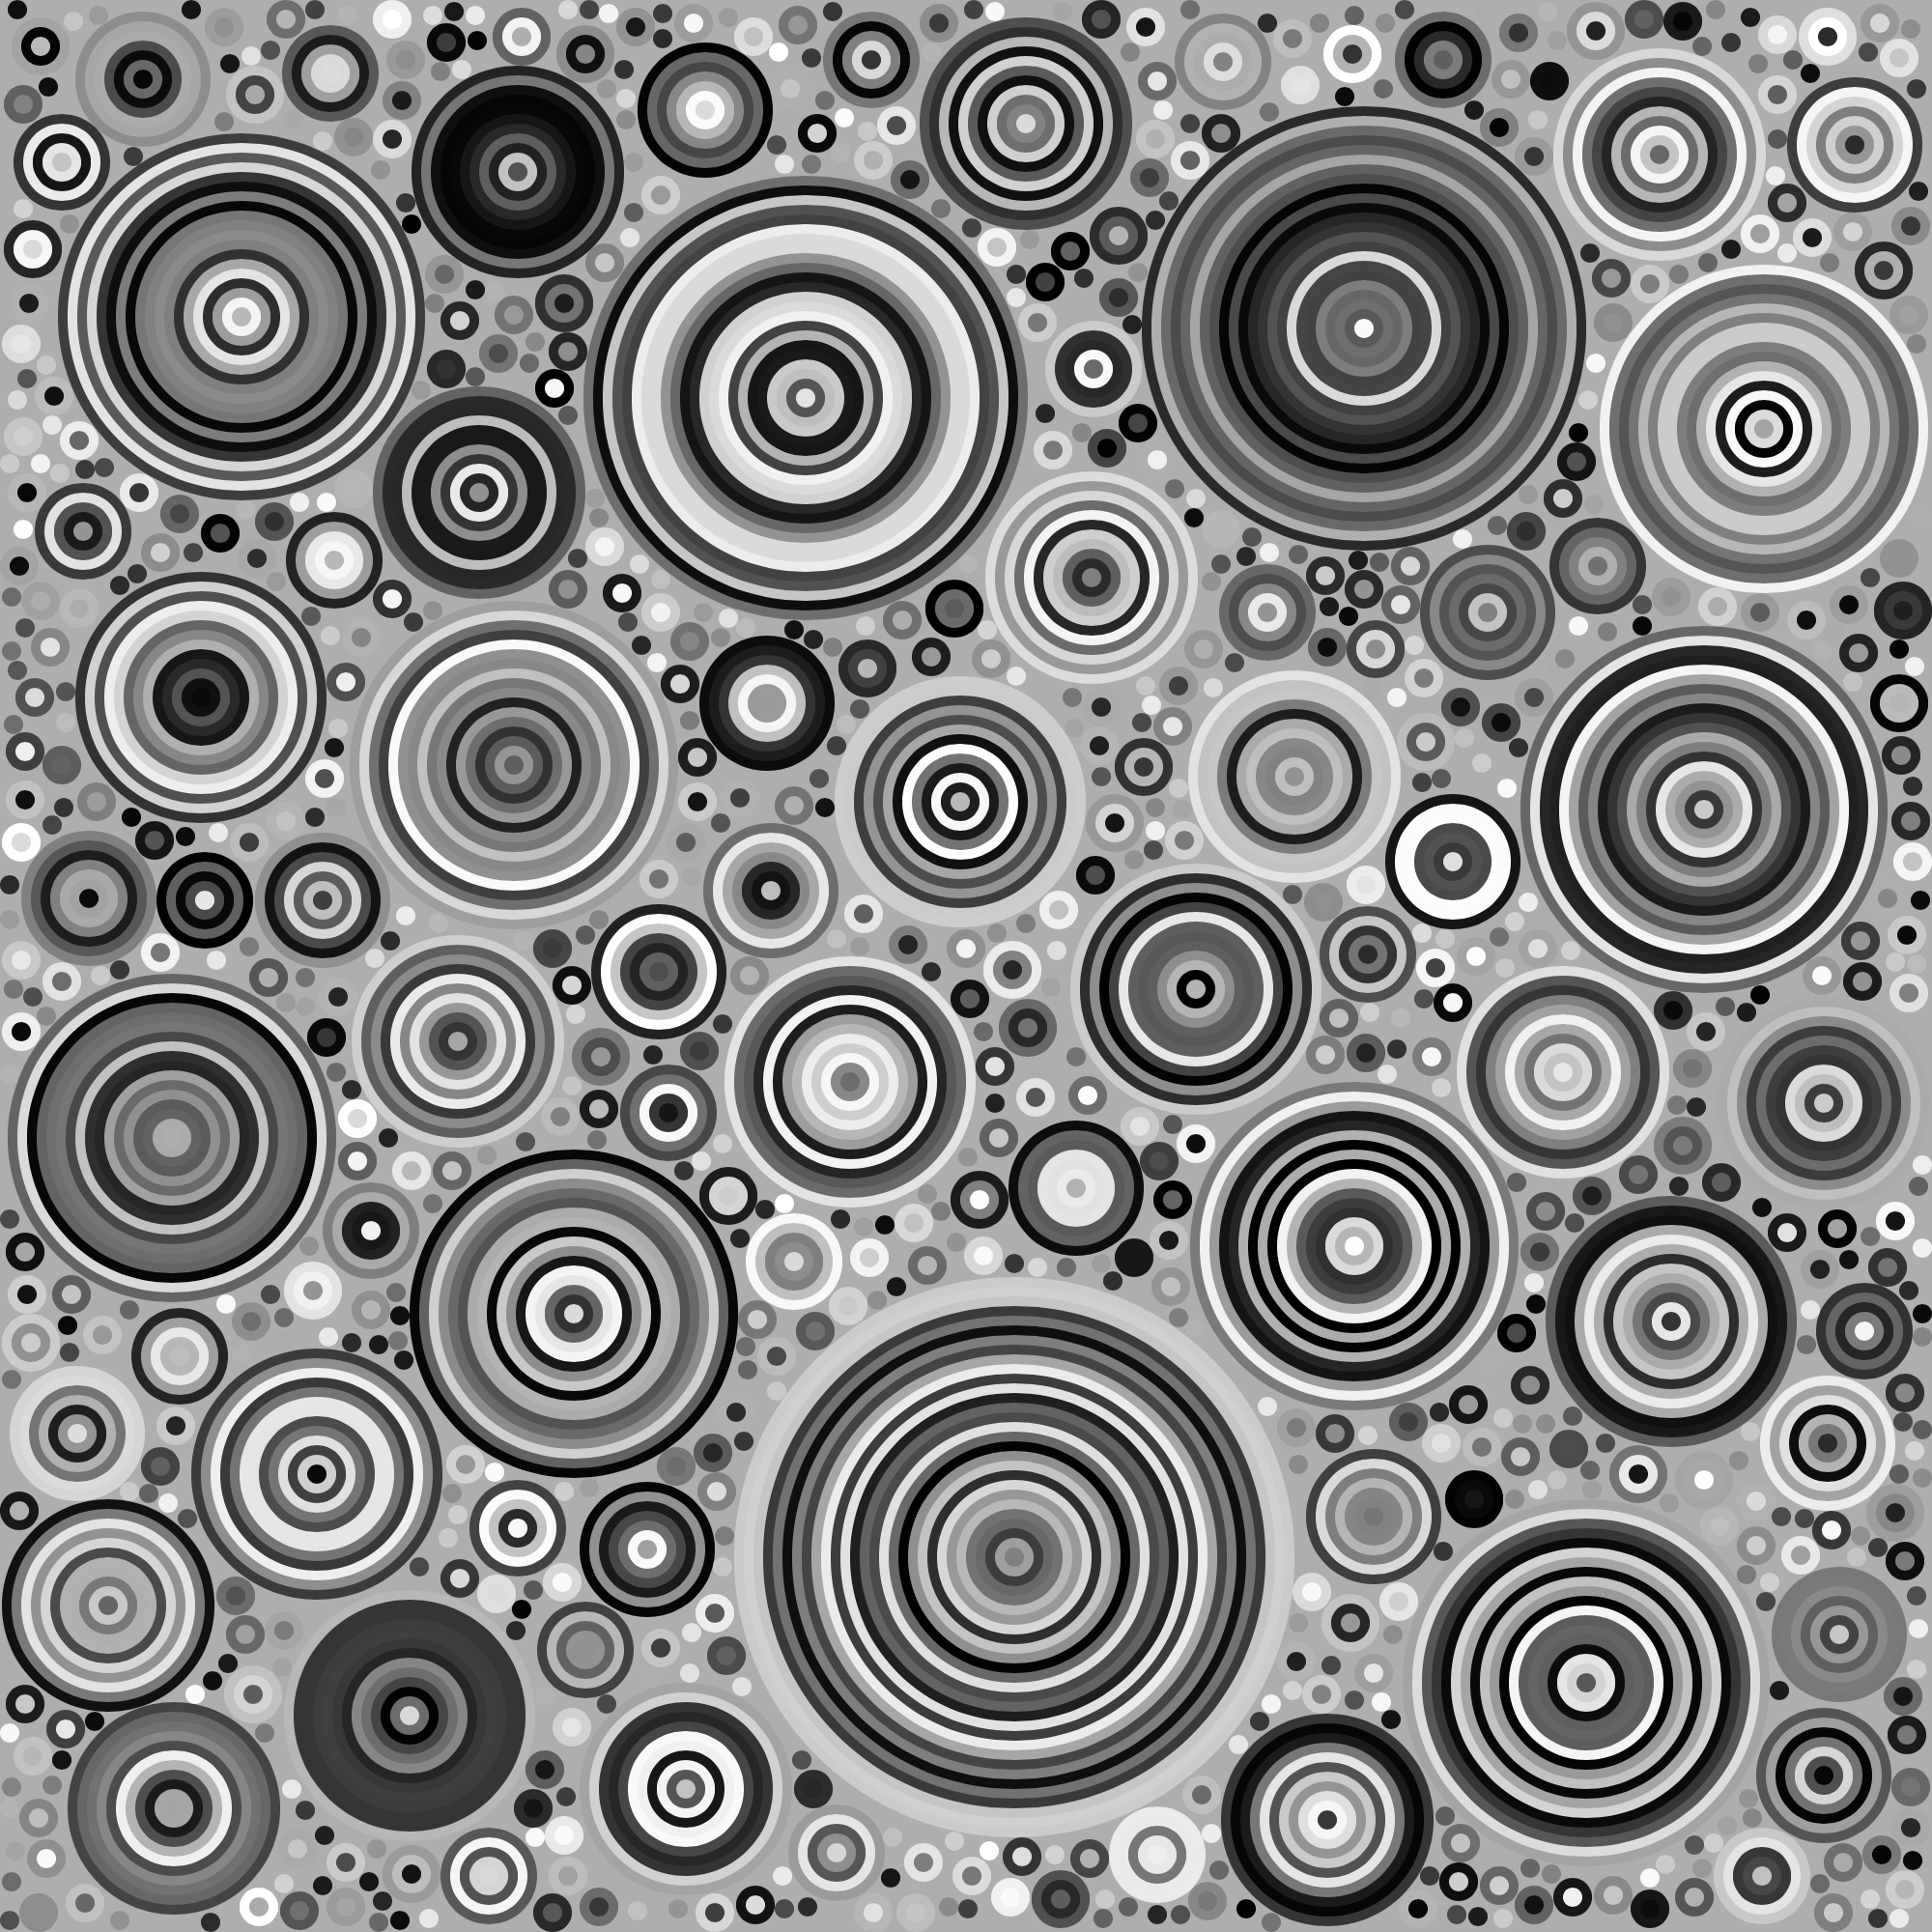 Groups of concentric circles of various sizes and random grayscale colors fill a square image.